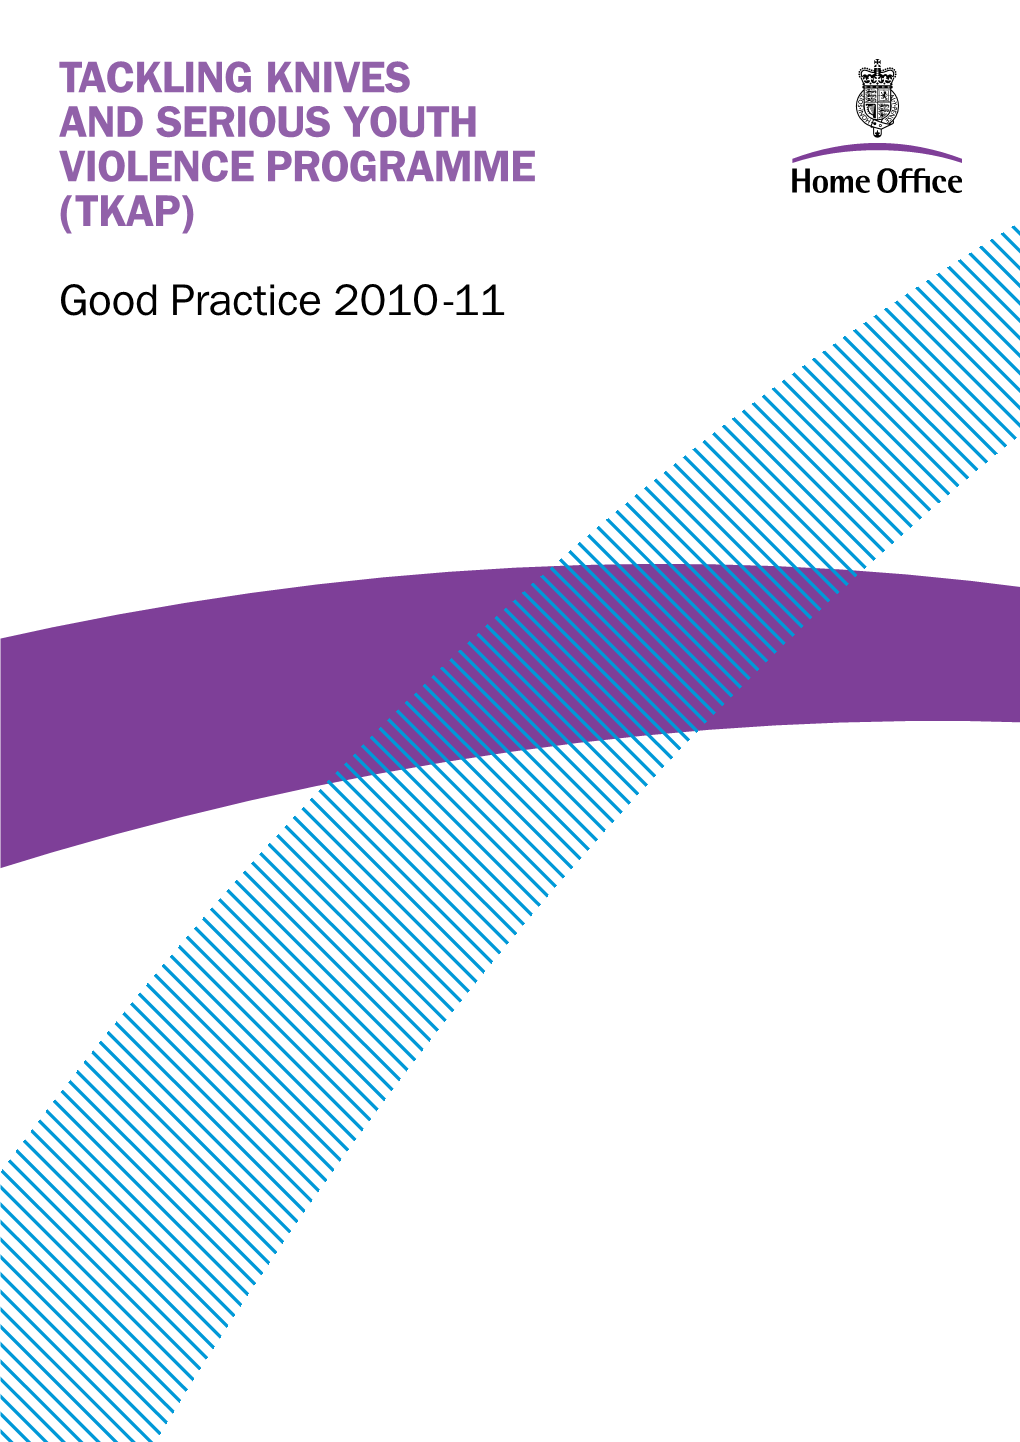 Tackling Knives and Serious Youth Violence Programme (TKAP) Good Practice 2010 -11 Contents